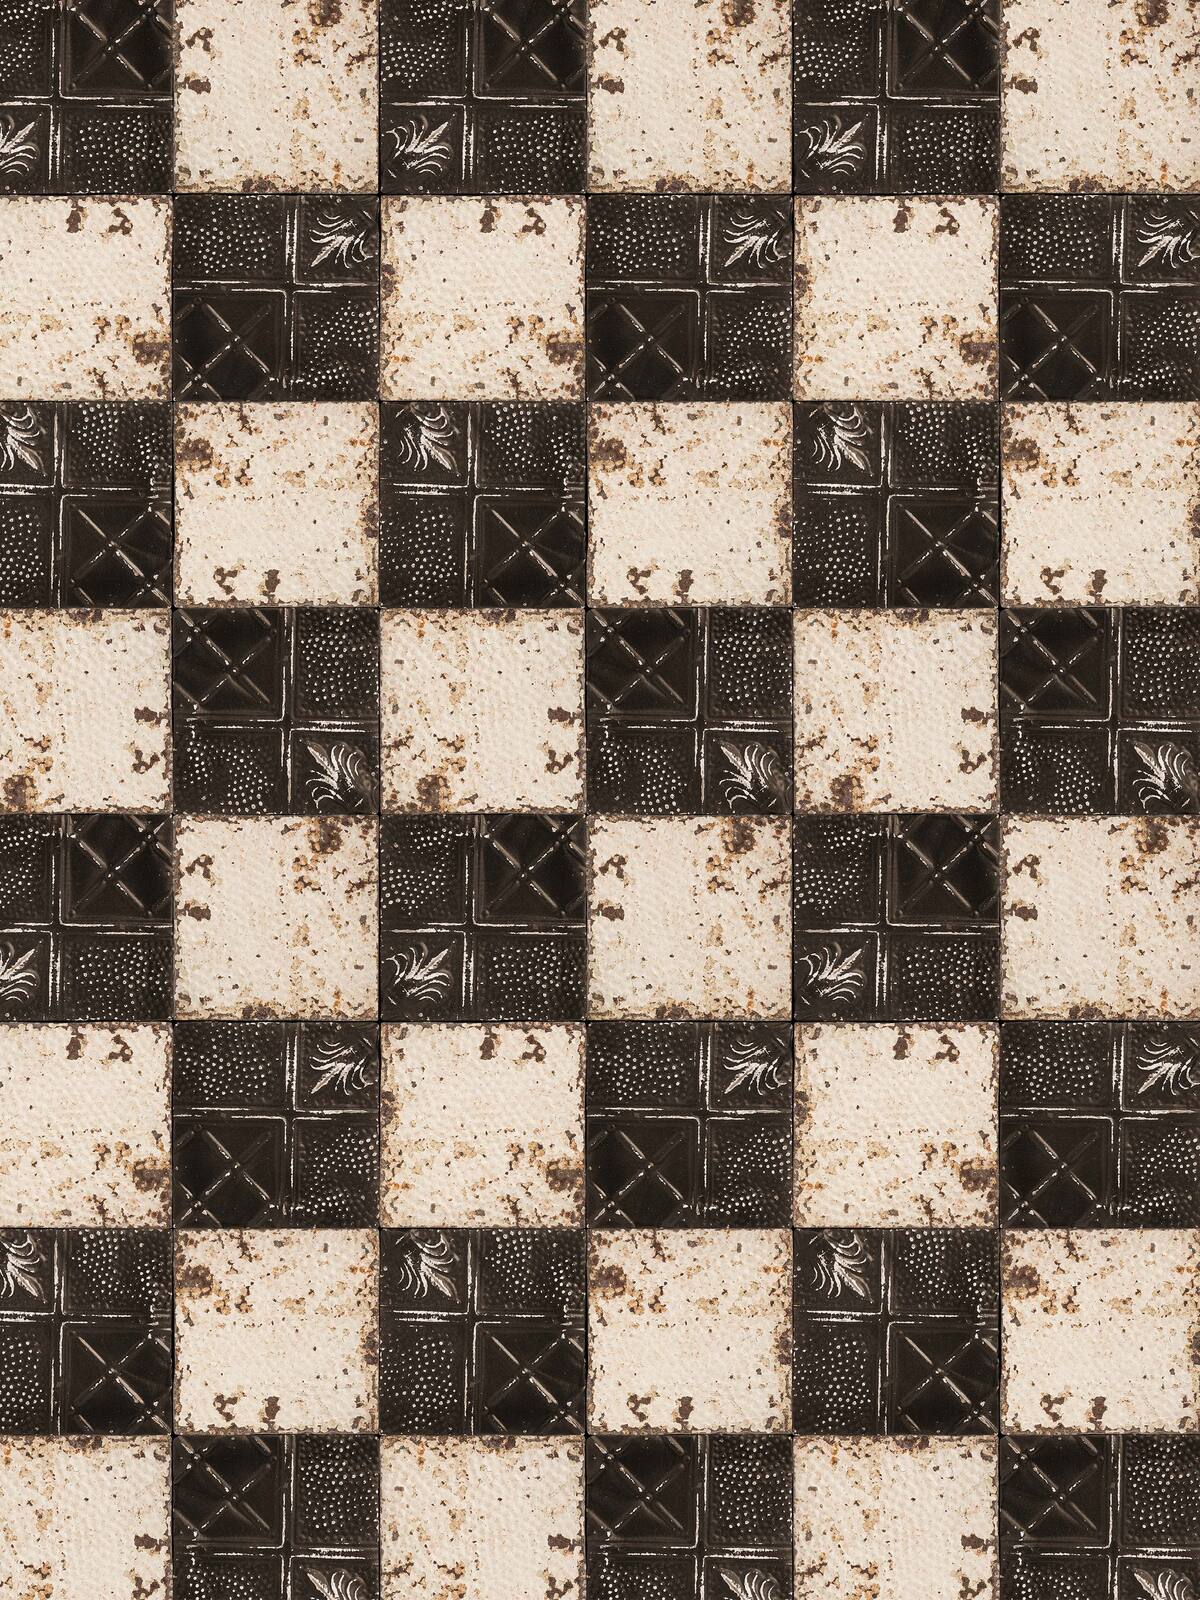 Our Checkered Plates photo wallpaper features high-resolution photos of old metal plates.